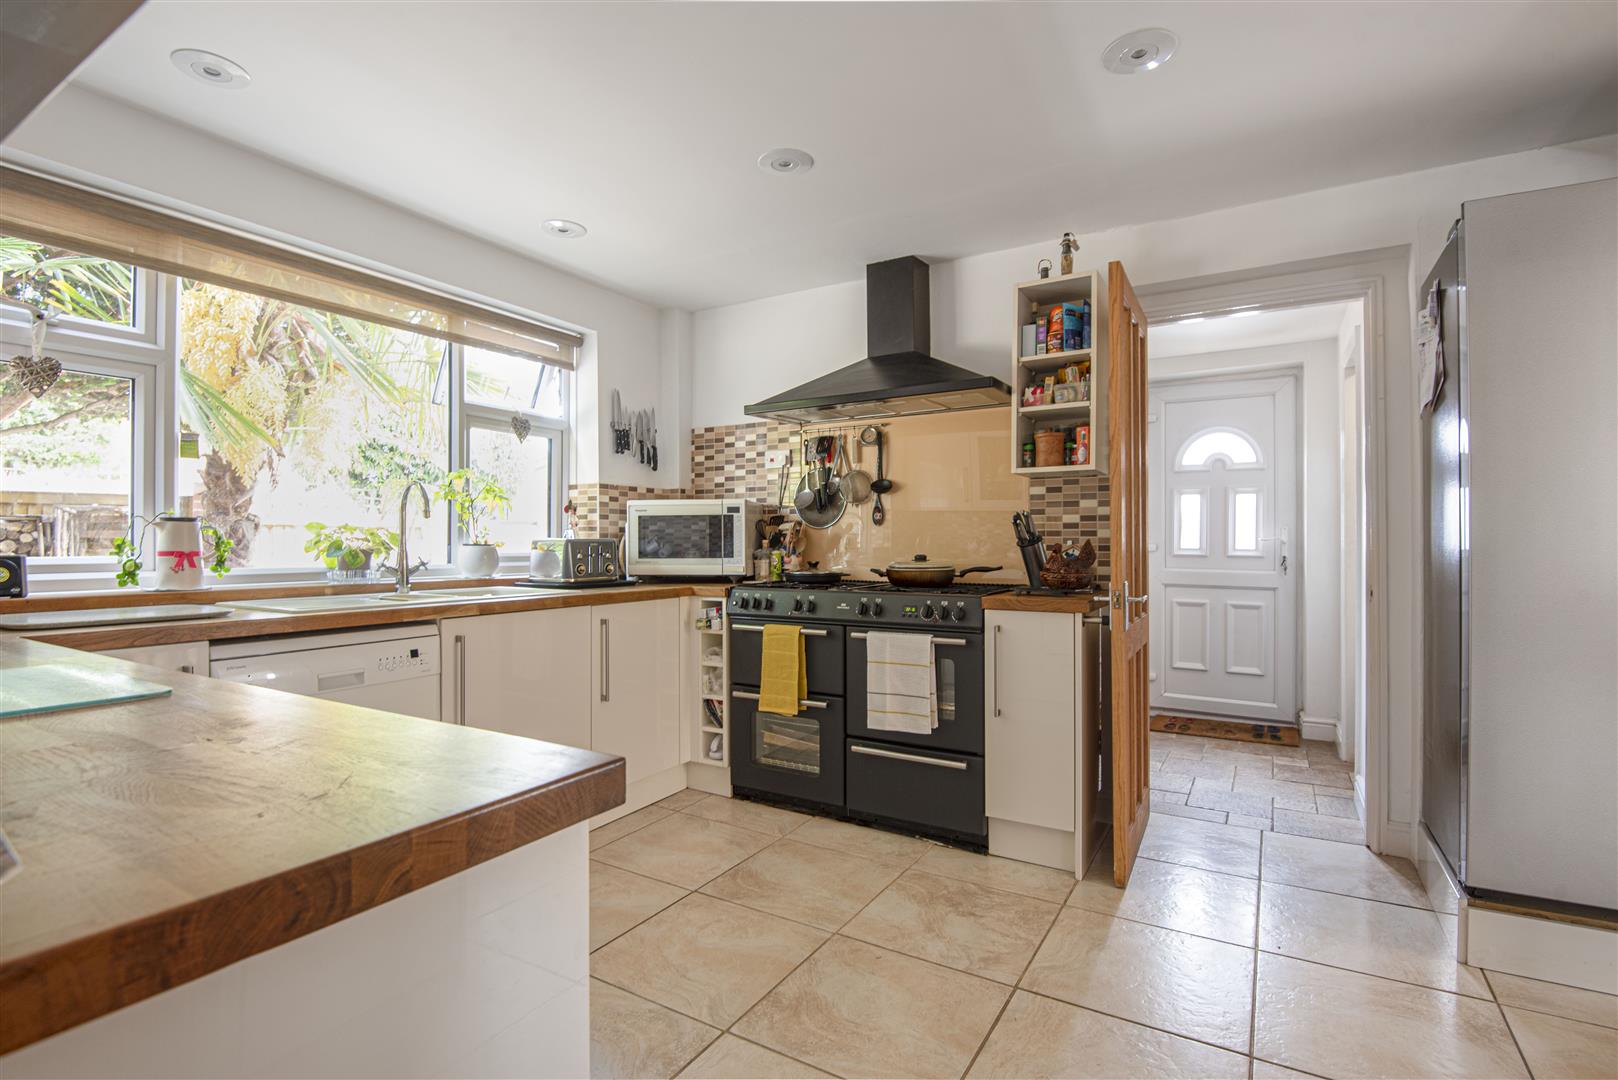 Cromwell Road Caversham house for sale in Reading